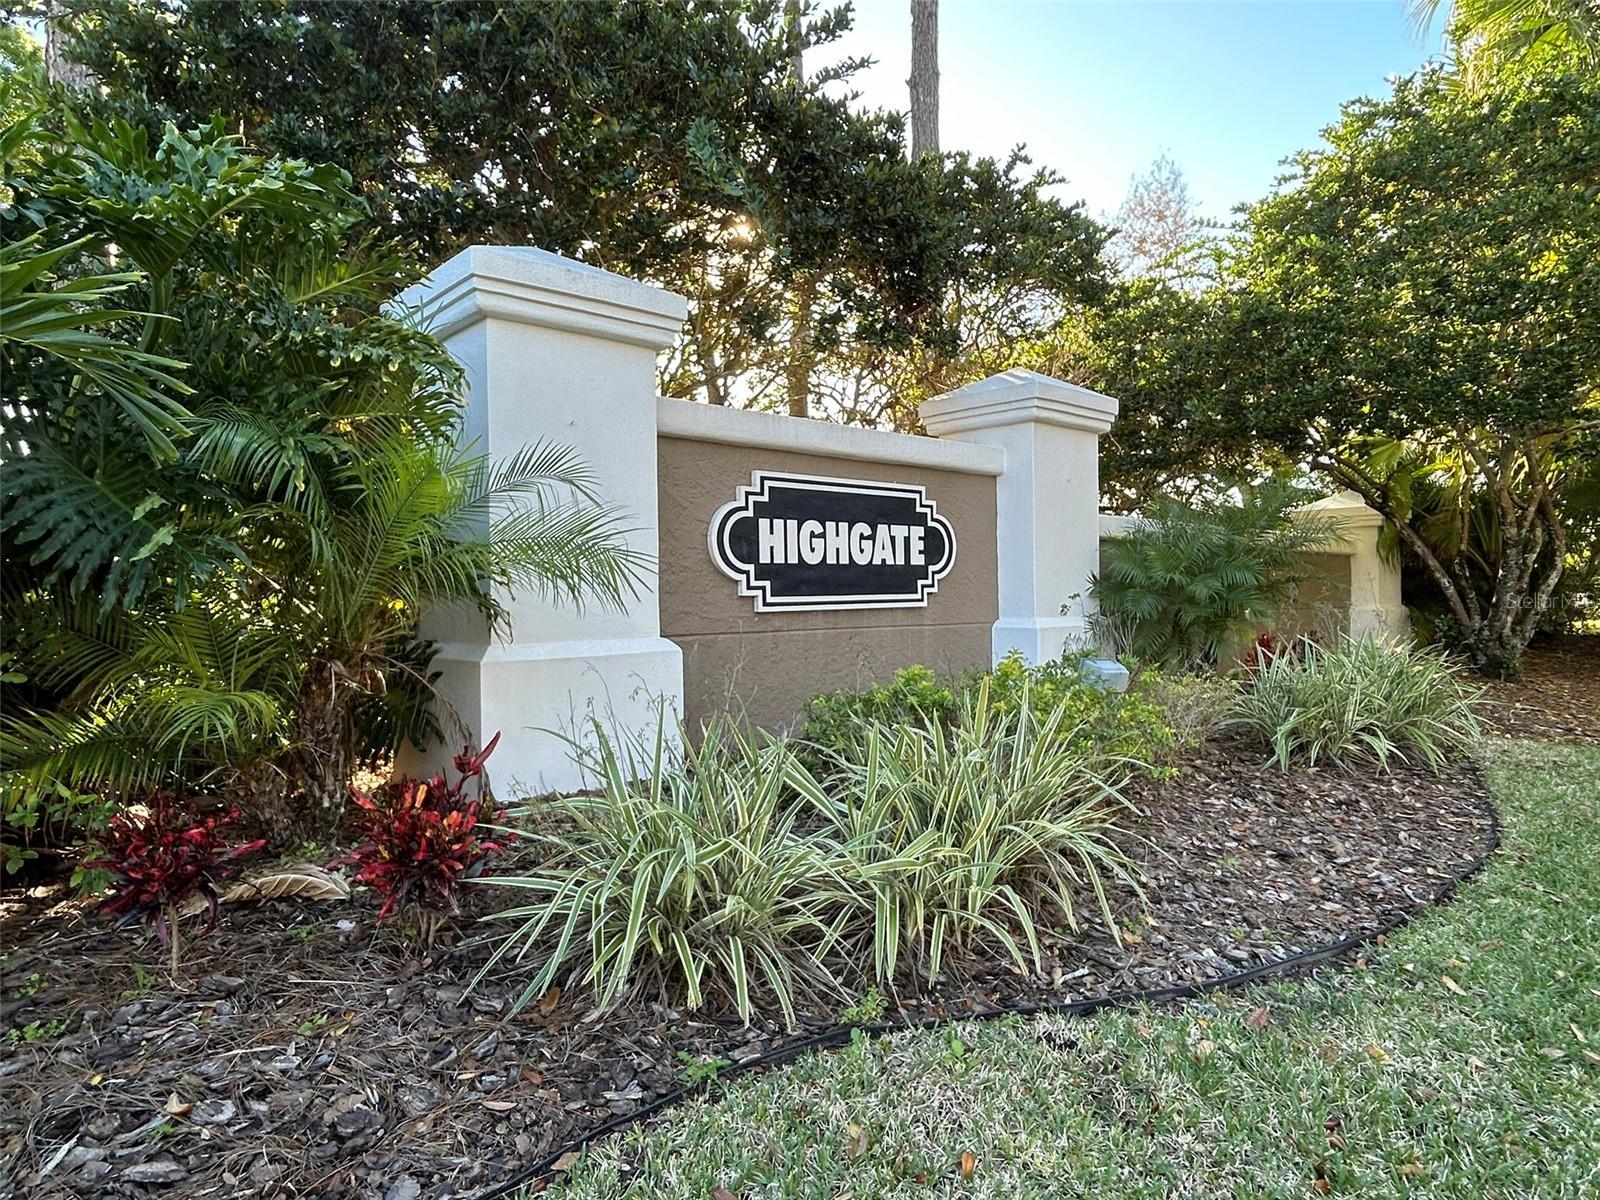 Highgate is a subdivision of Lansbrook, in Palm Harbor, FL, in the Tampa Bay area